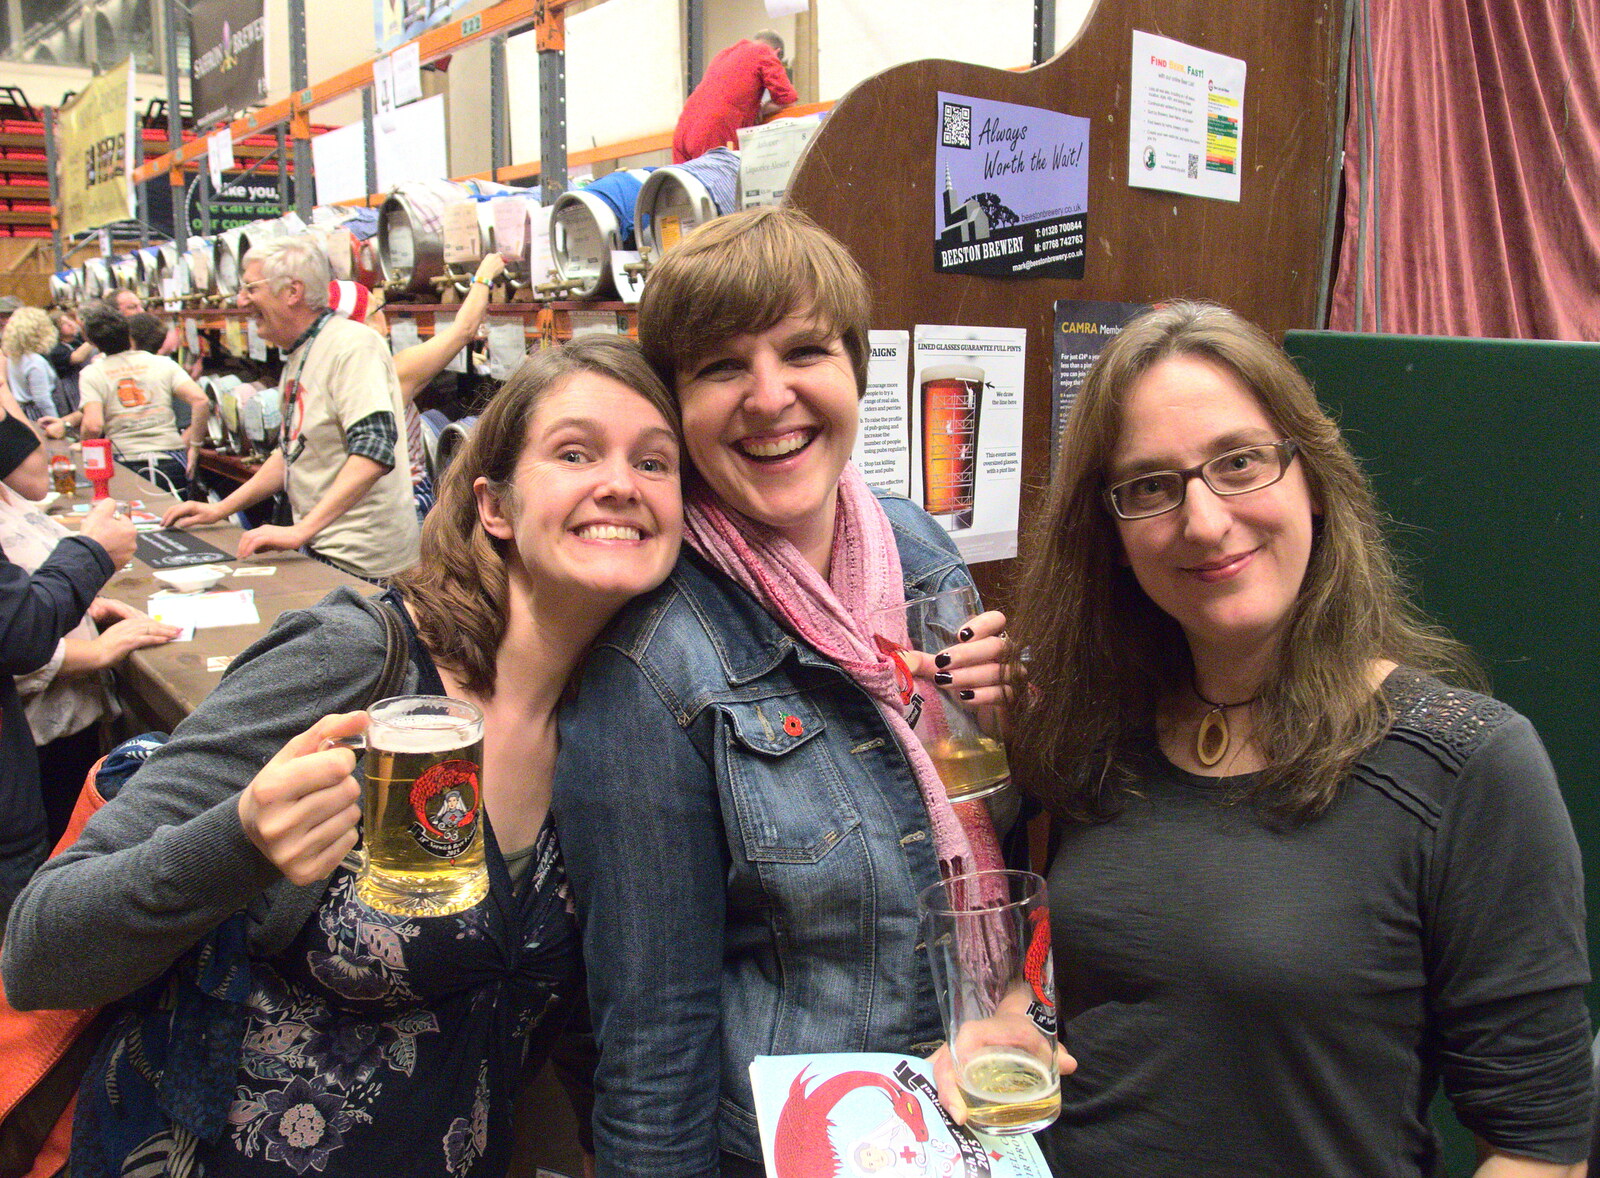 Isobel, Sarah and Suey at the bar from The 38th Norwich Beer Festival, Norwich, Norfolk - 28th October 2015